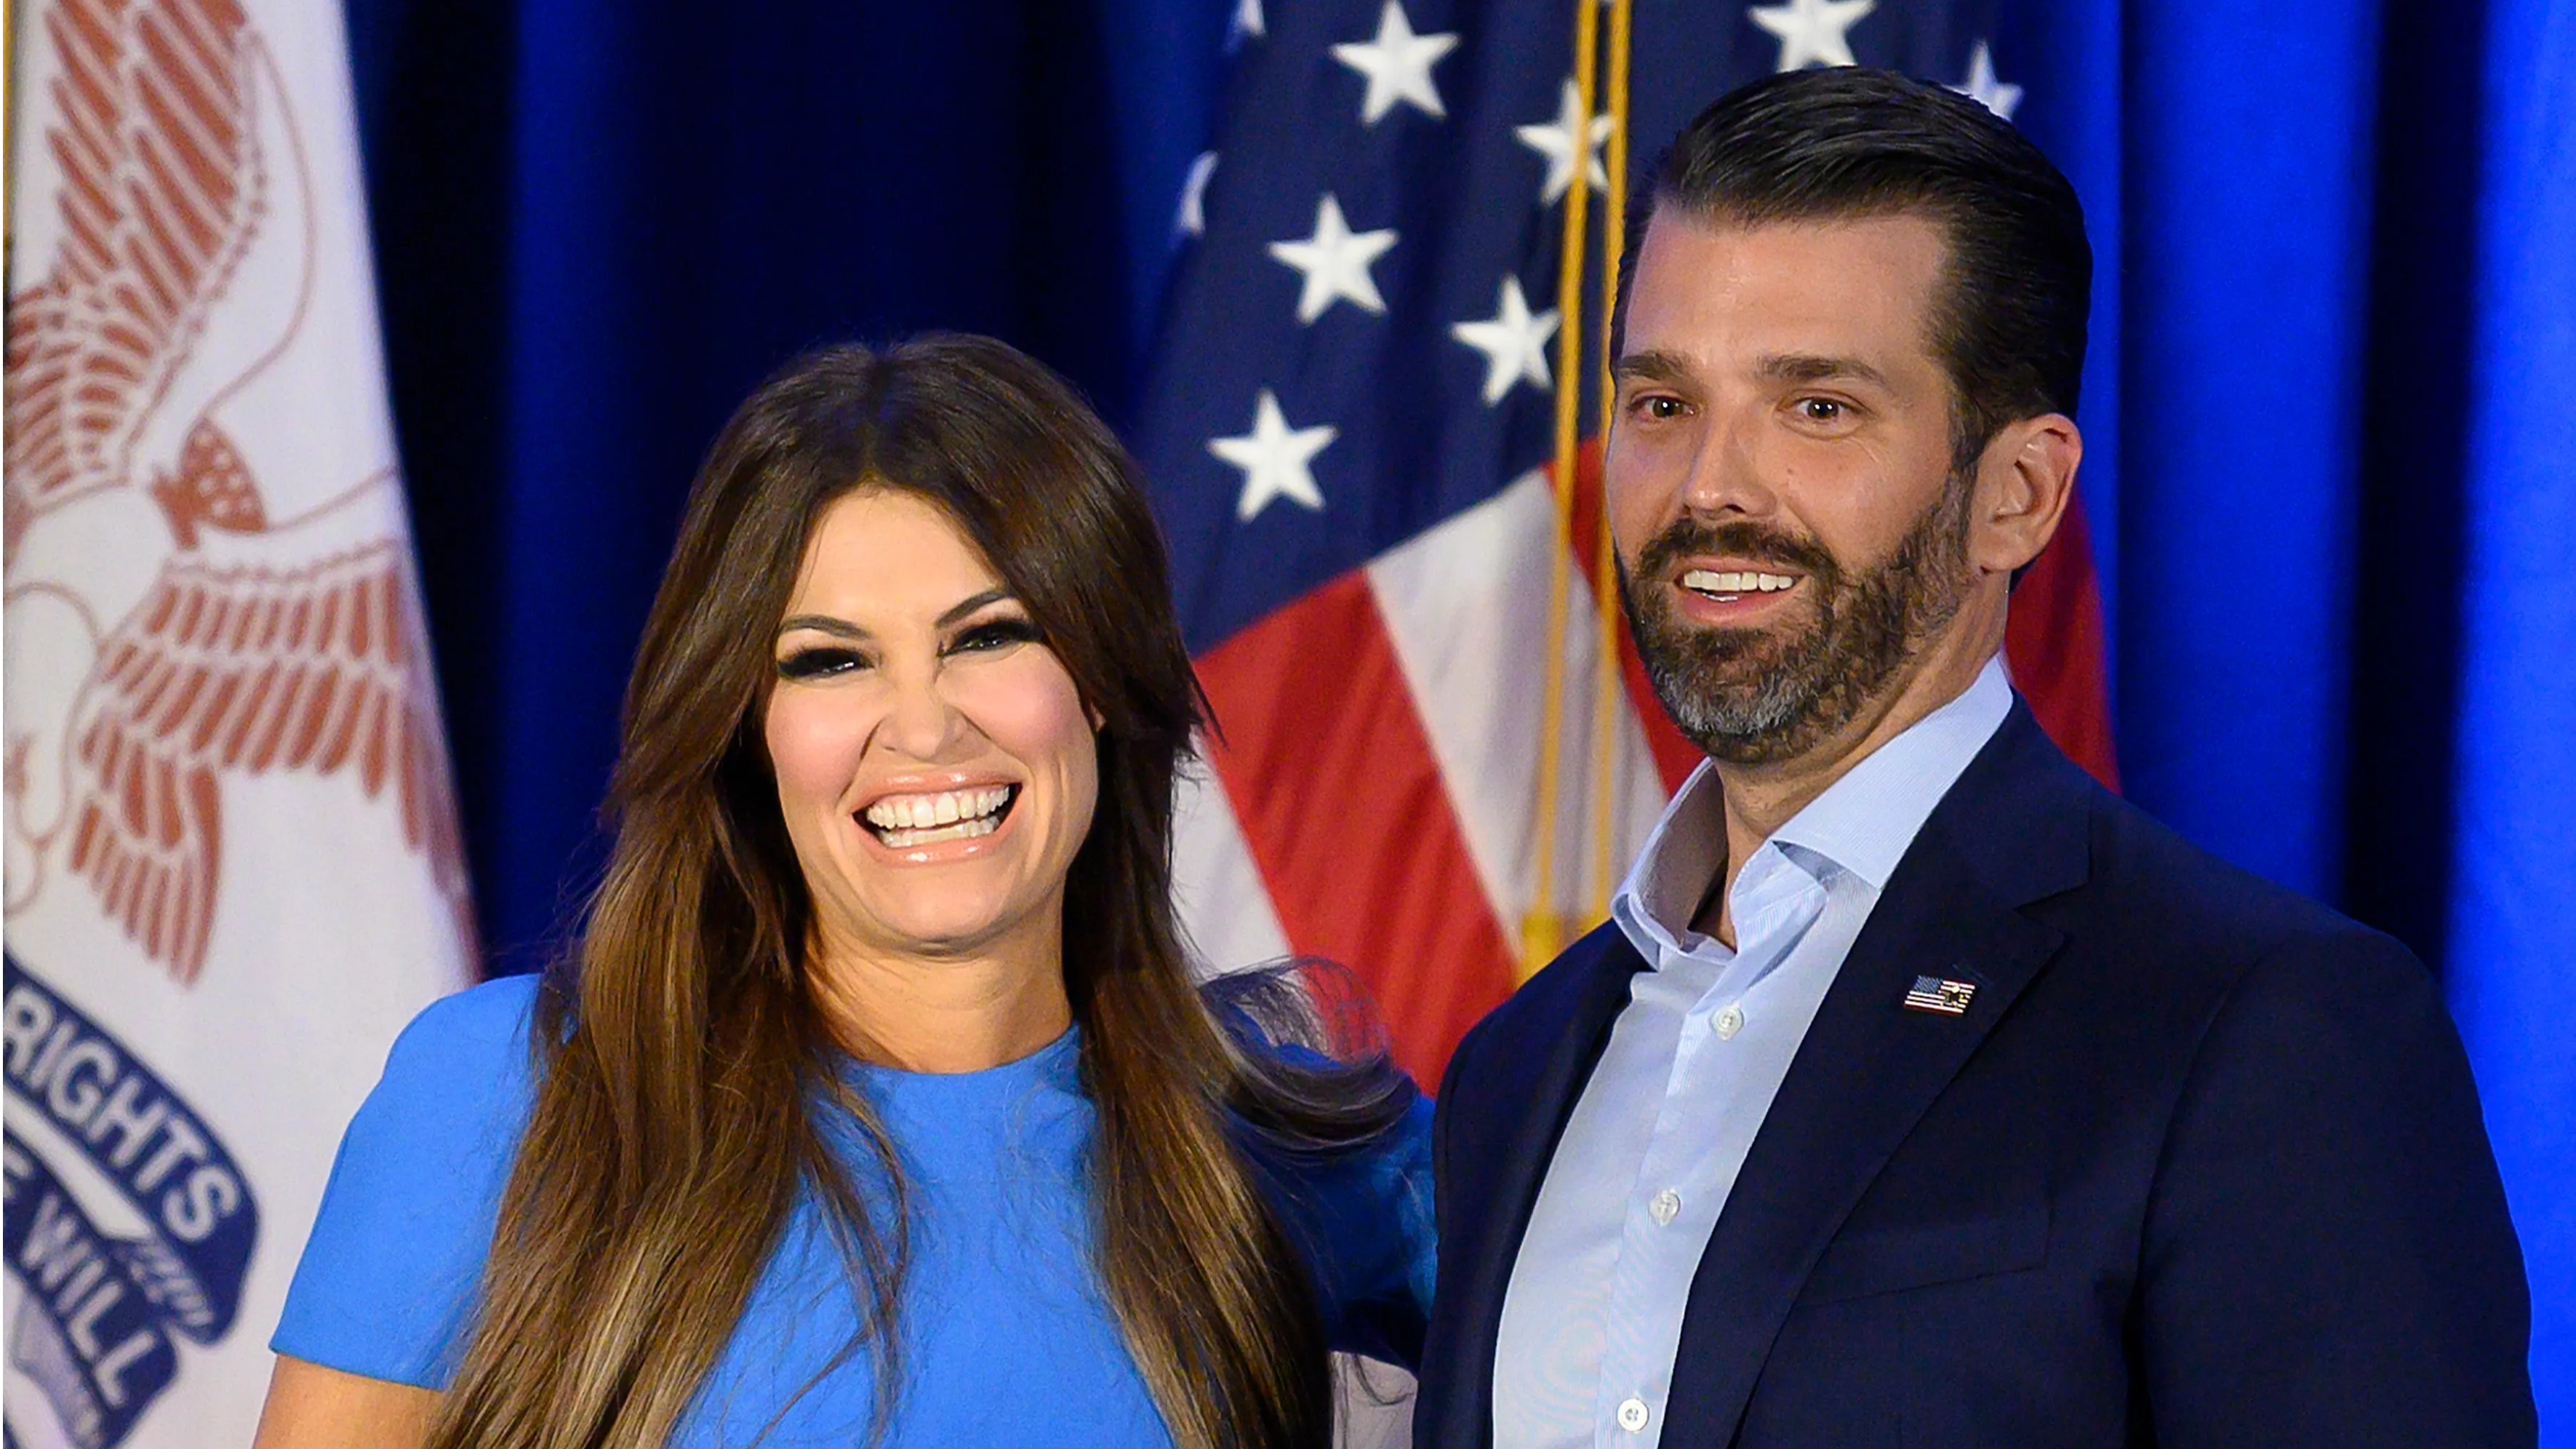 Donald Trump will put America first, says Kimberly Guilfoyle at Republican Convention